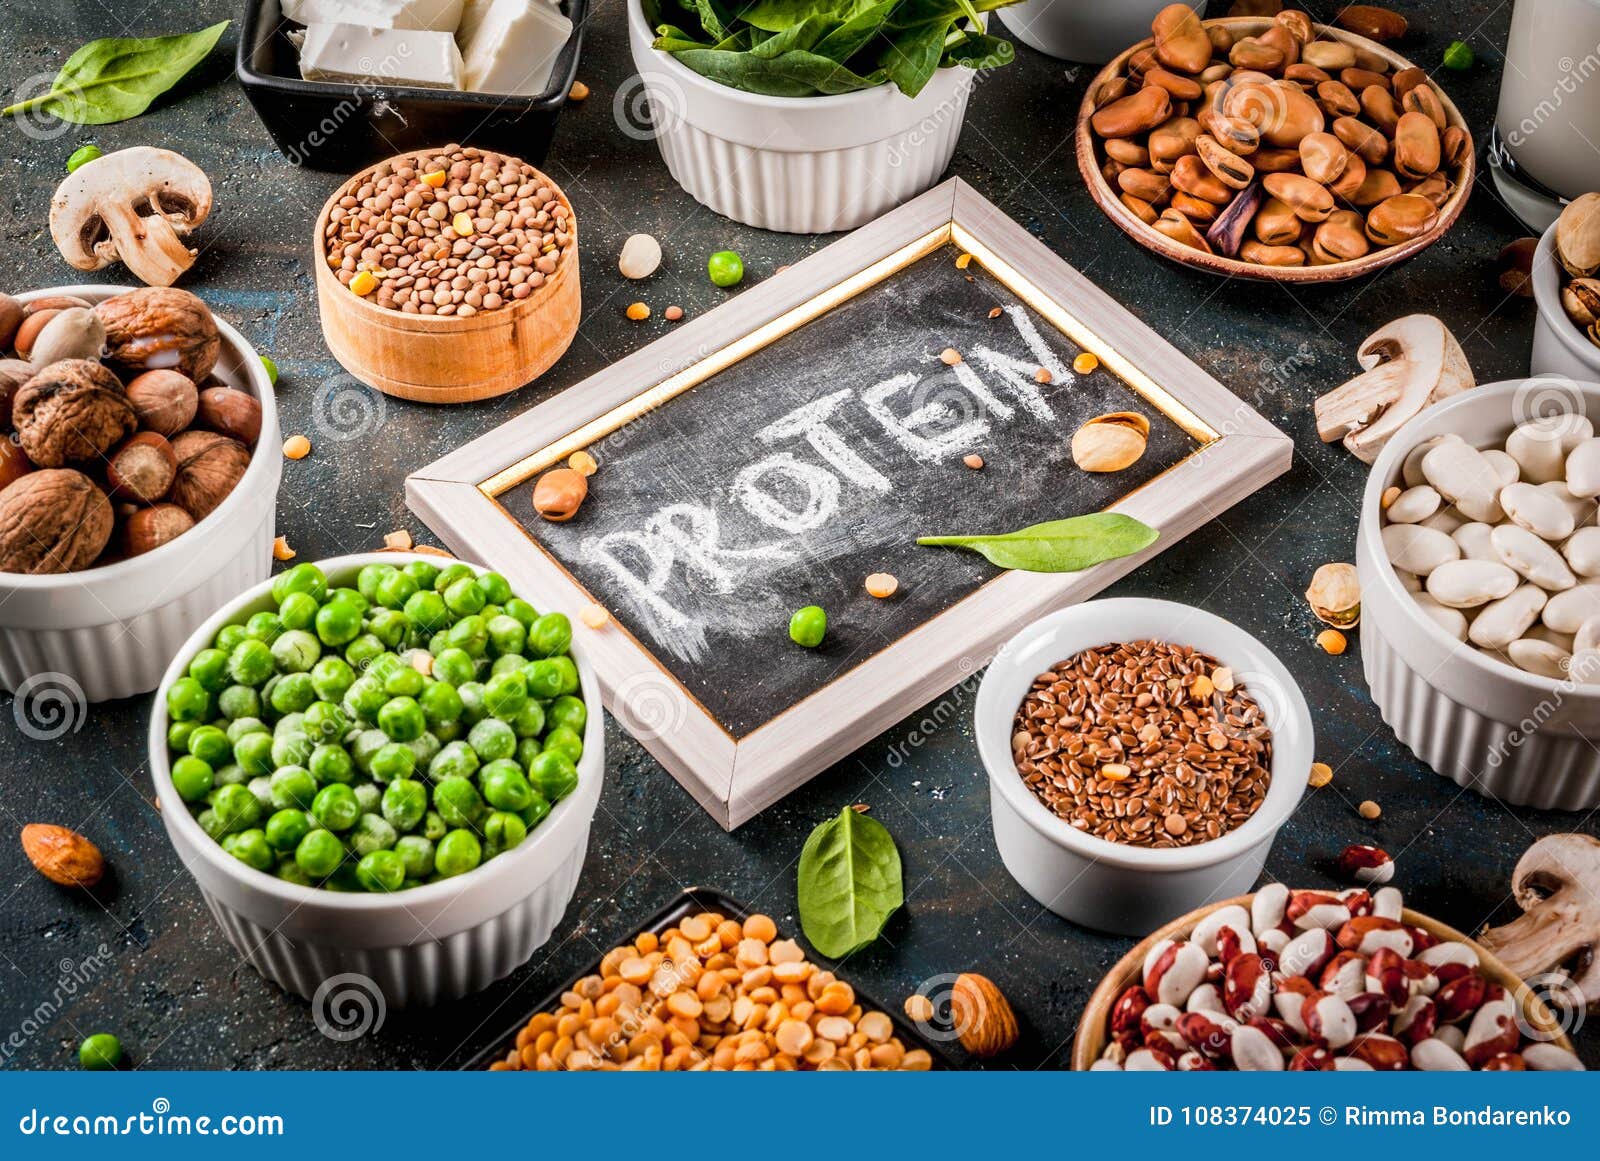 Vegan protein sources stock image. Image of natural - 108374025